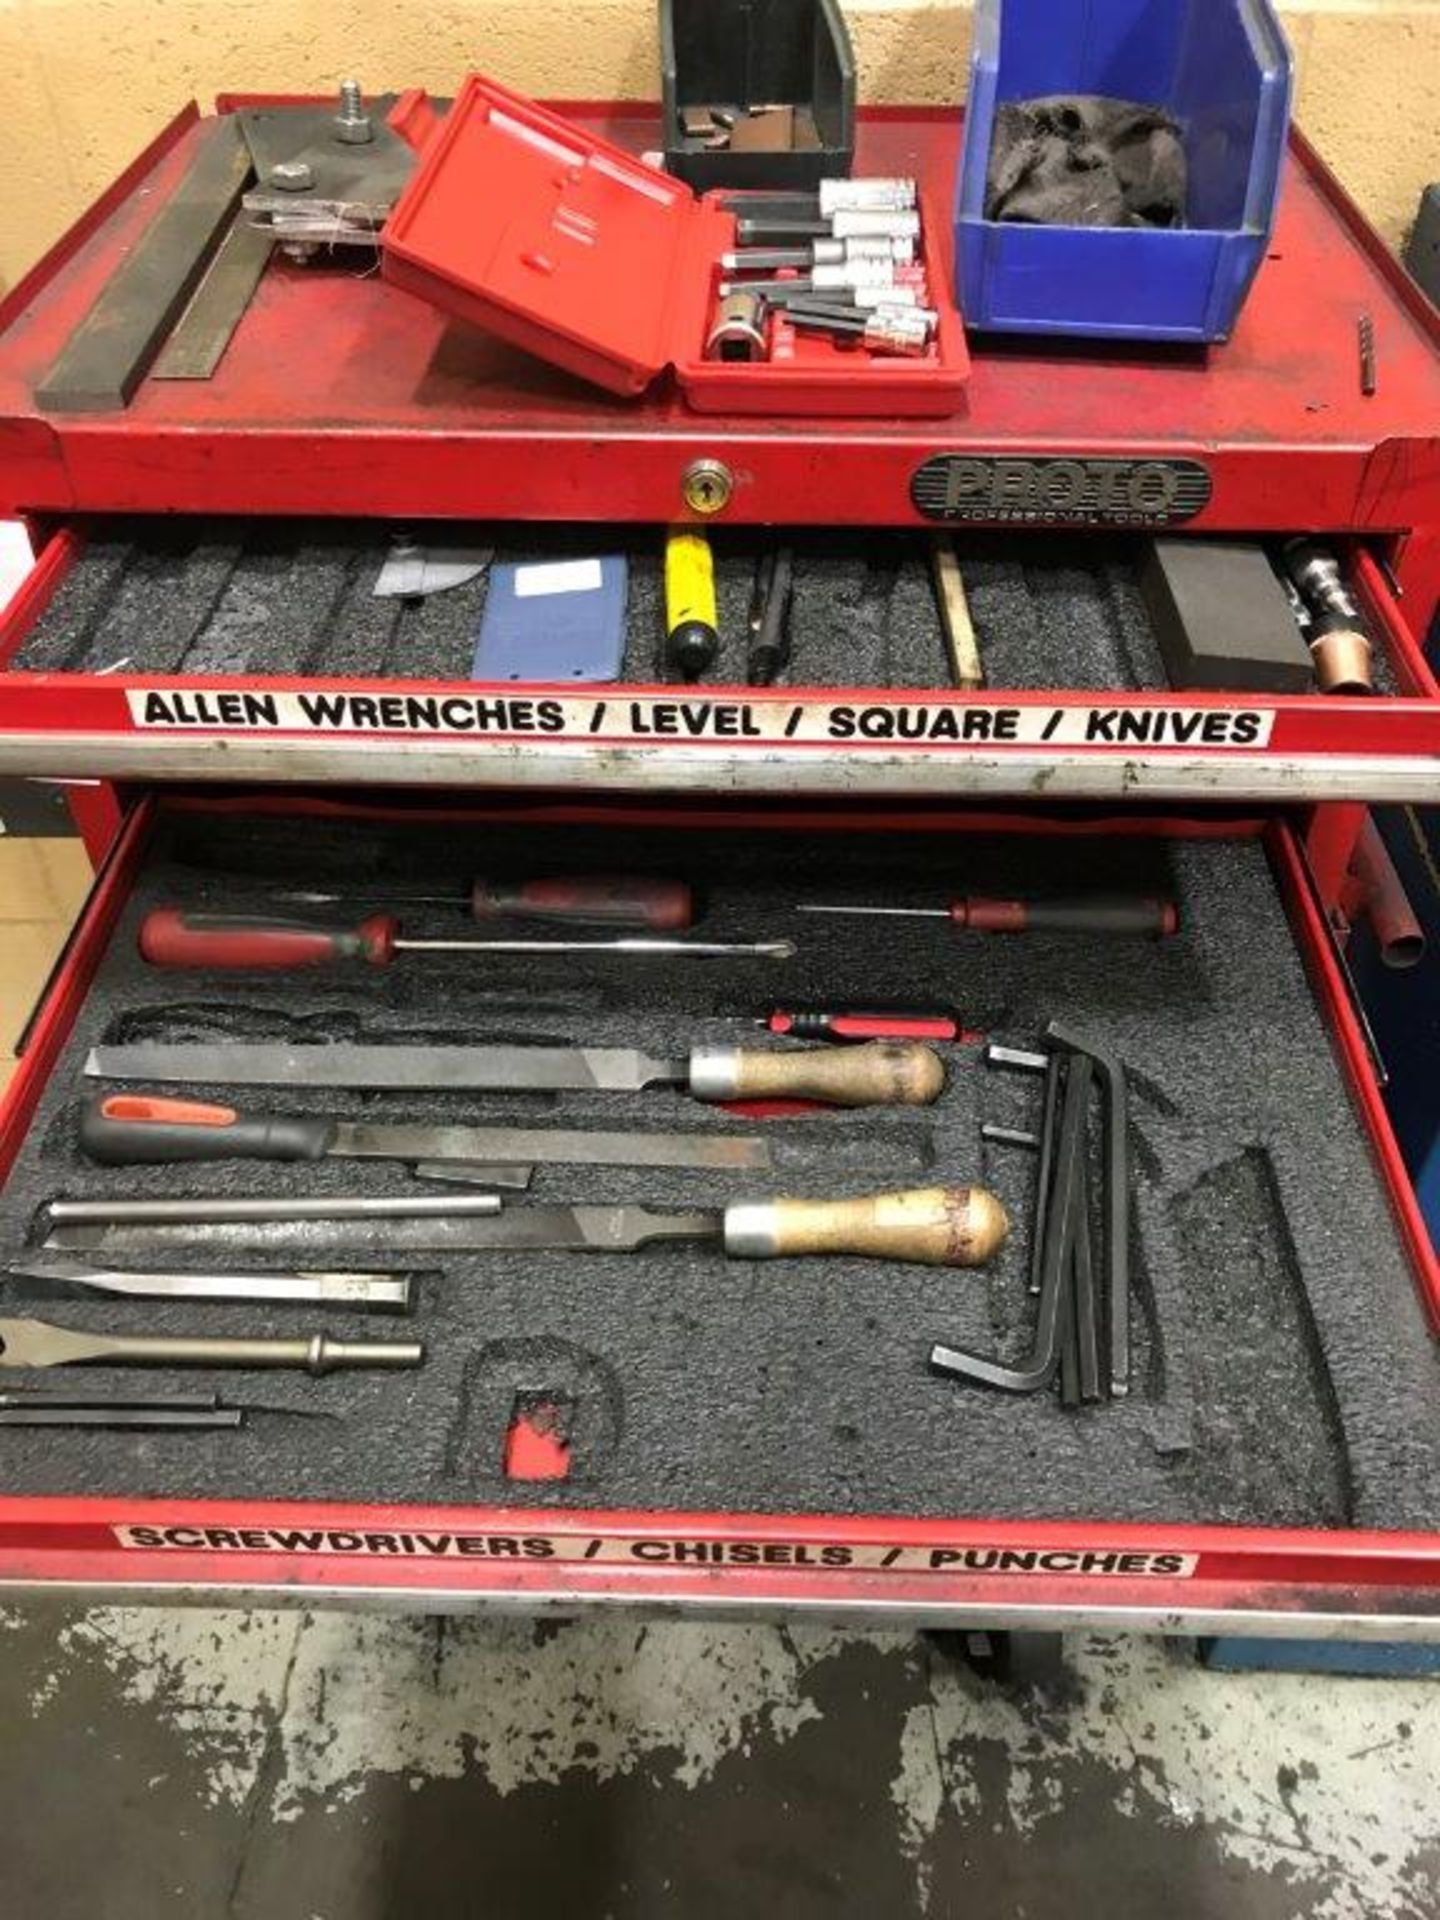 Proto (11) Drawer Mobile Tool Chest with Content of Assorted Hand Tools - Image 2 of 5